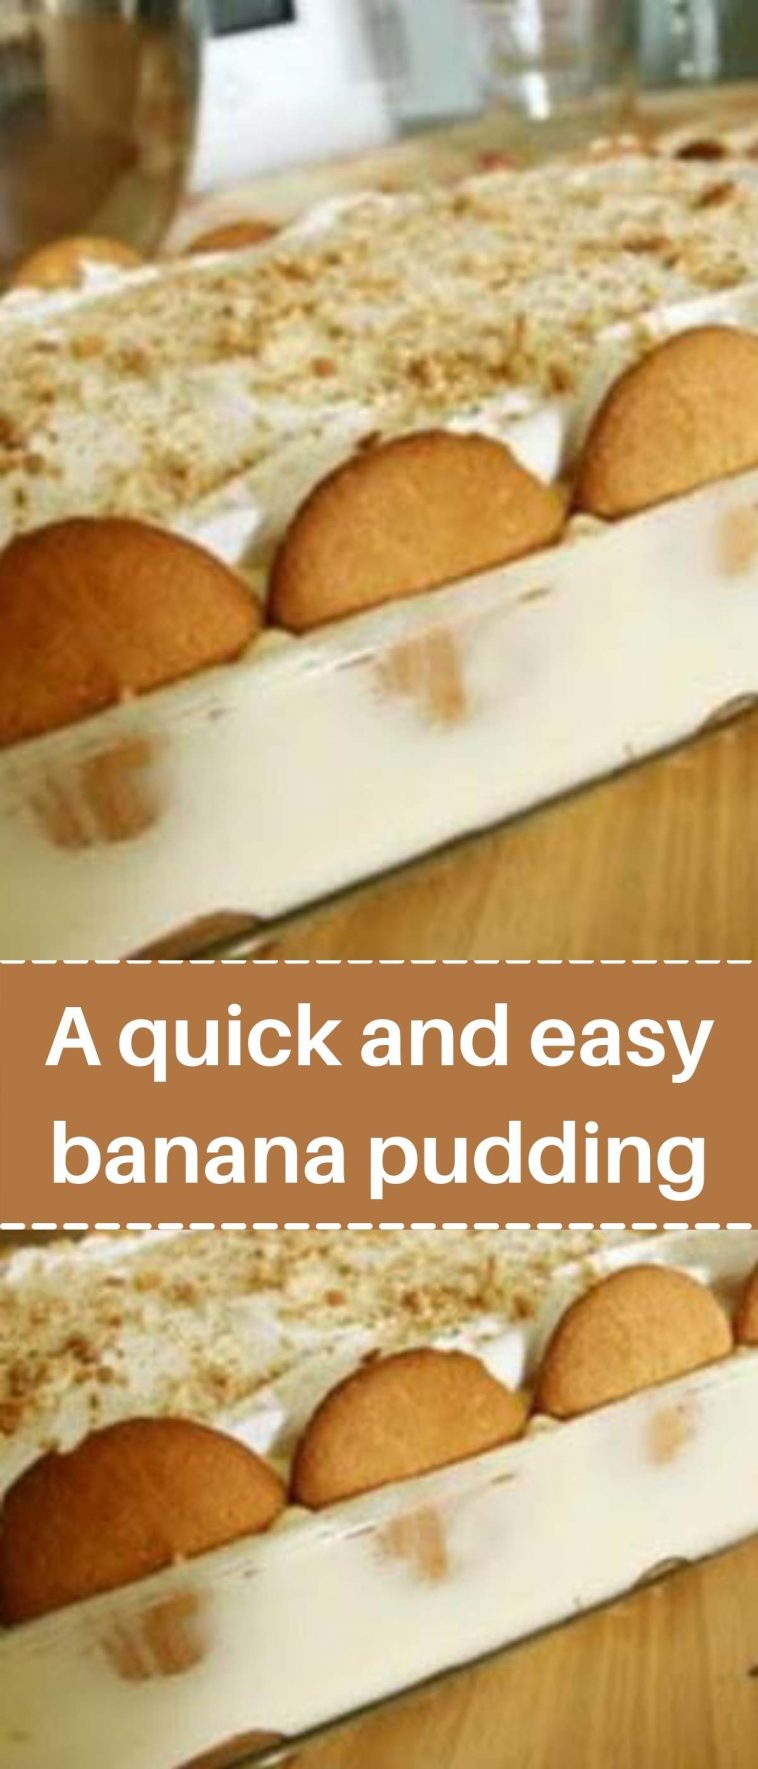 A quick and easy banana pudding recipe